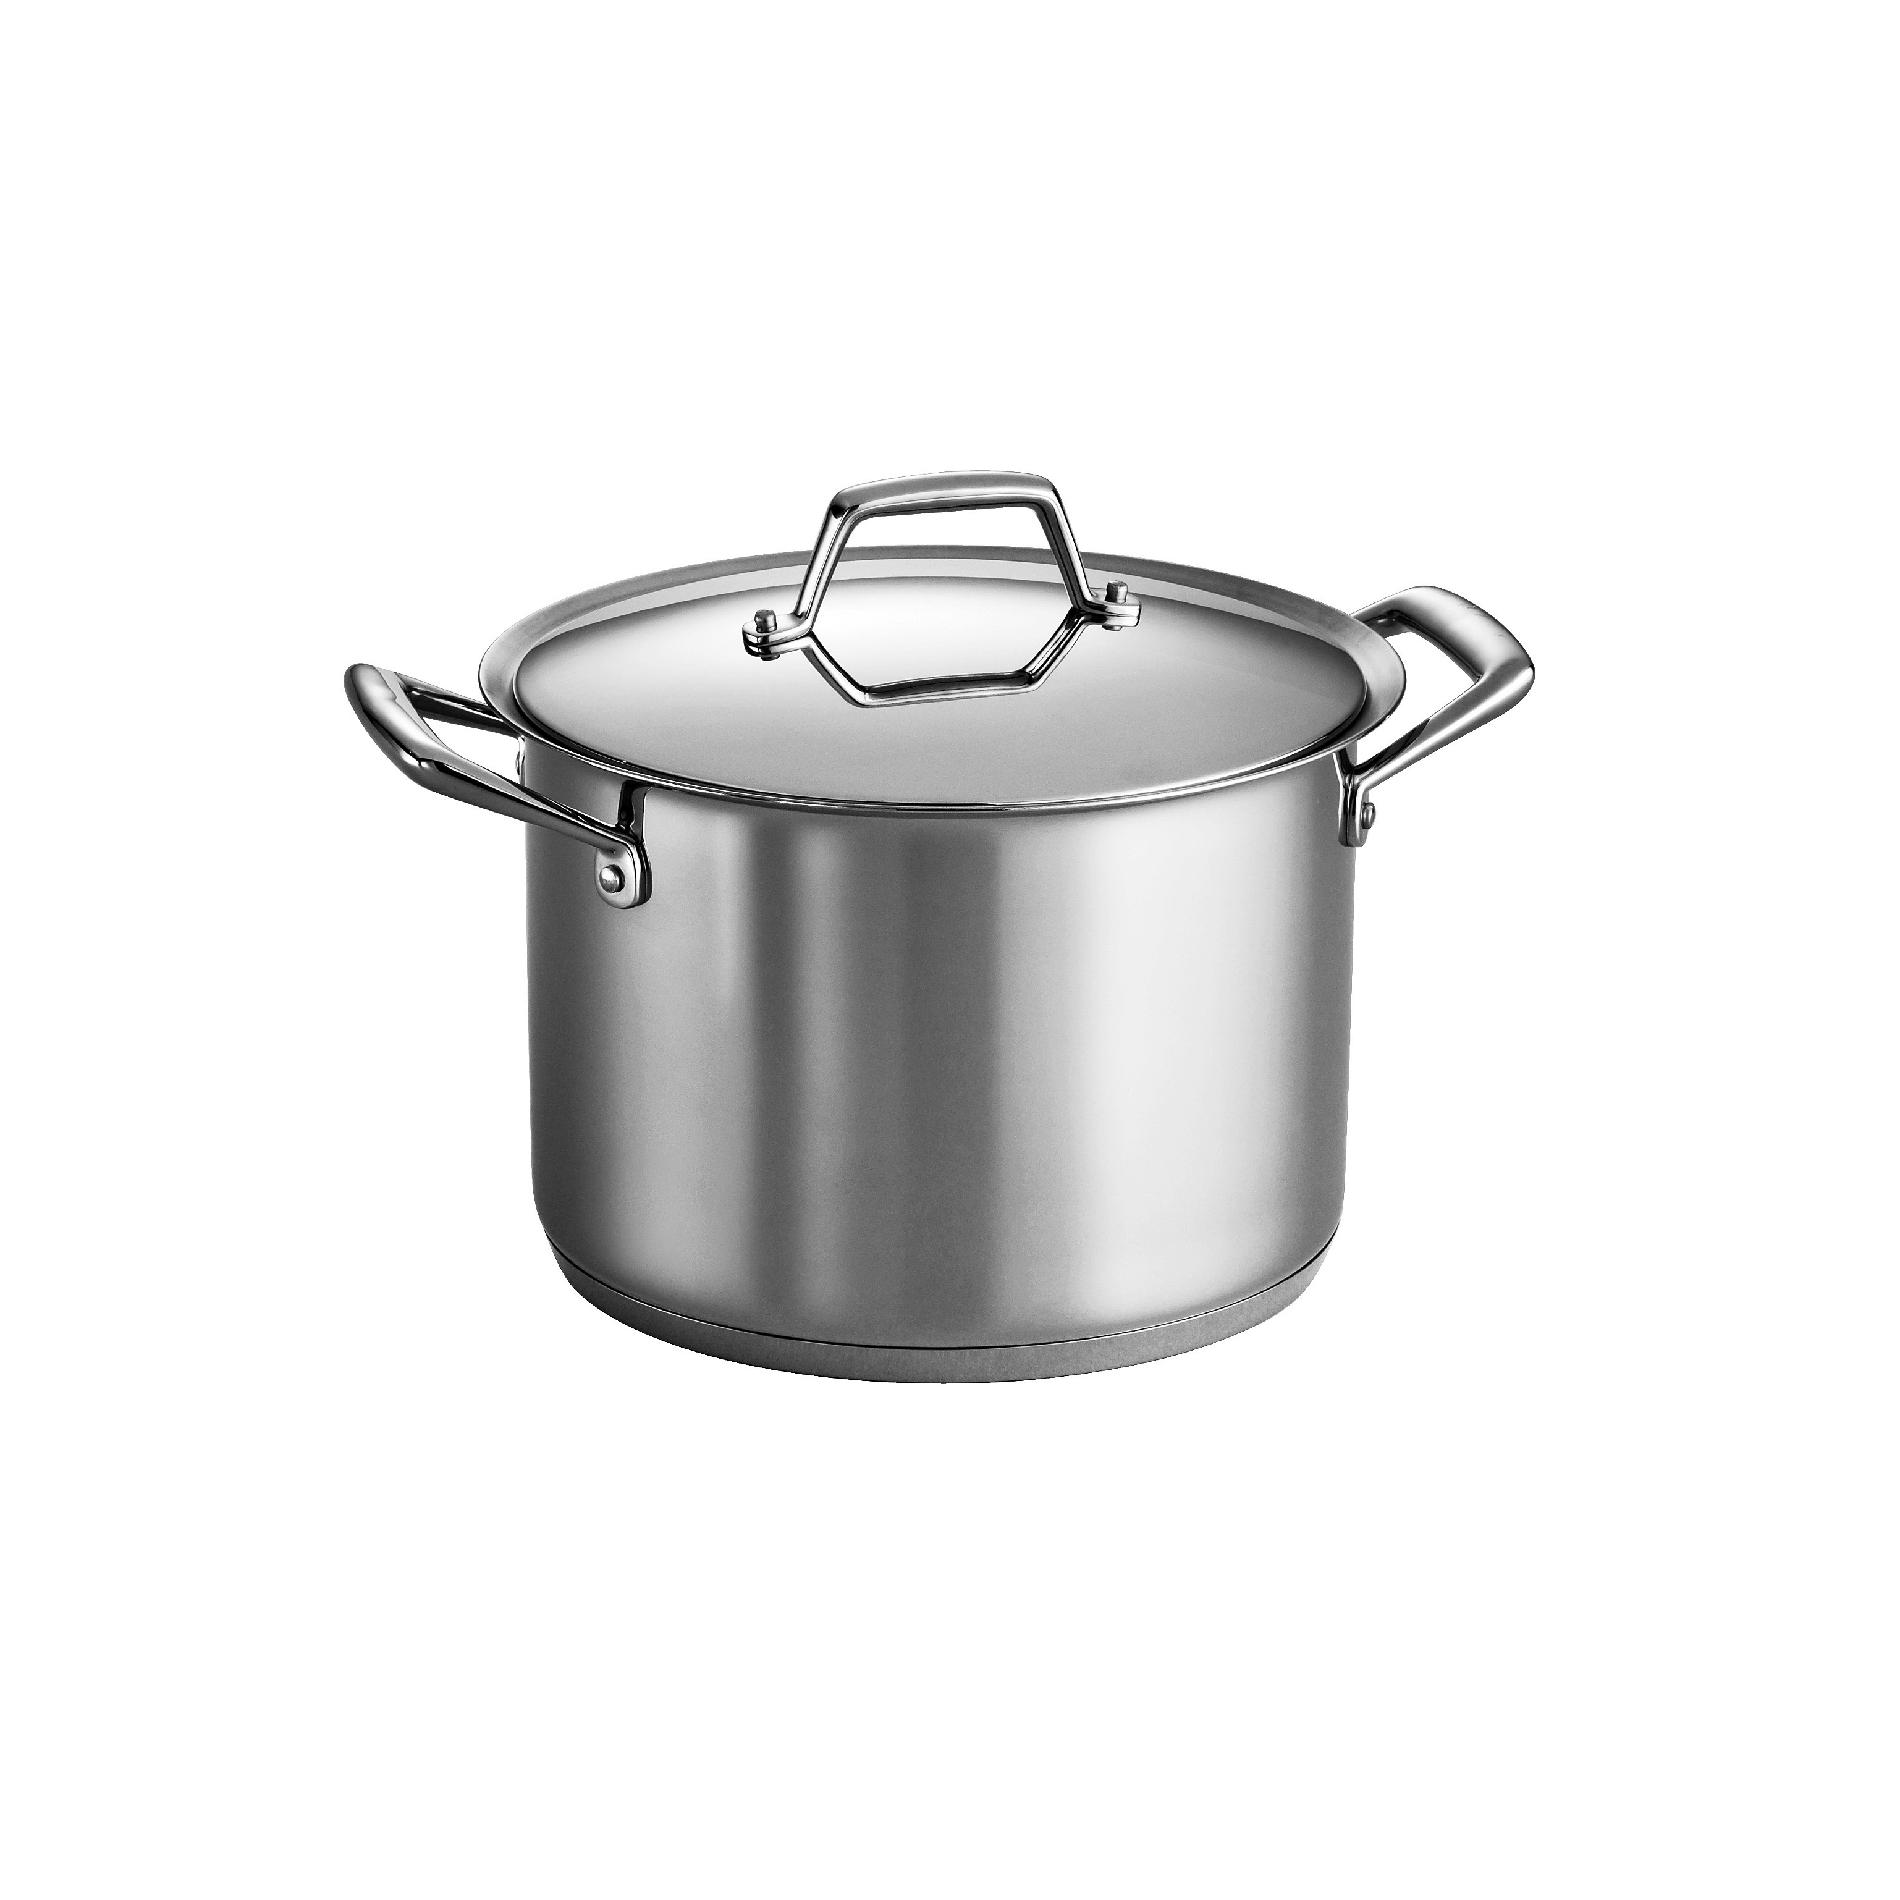 Gourmet Prima 18/10 Stainless Steel 12 Qt Covered Stock Pot